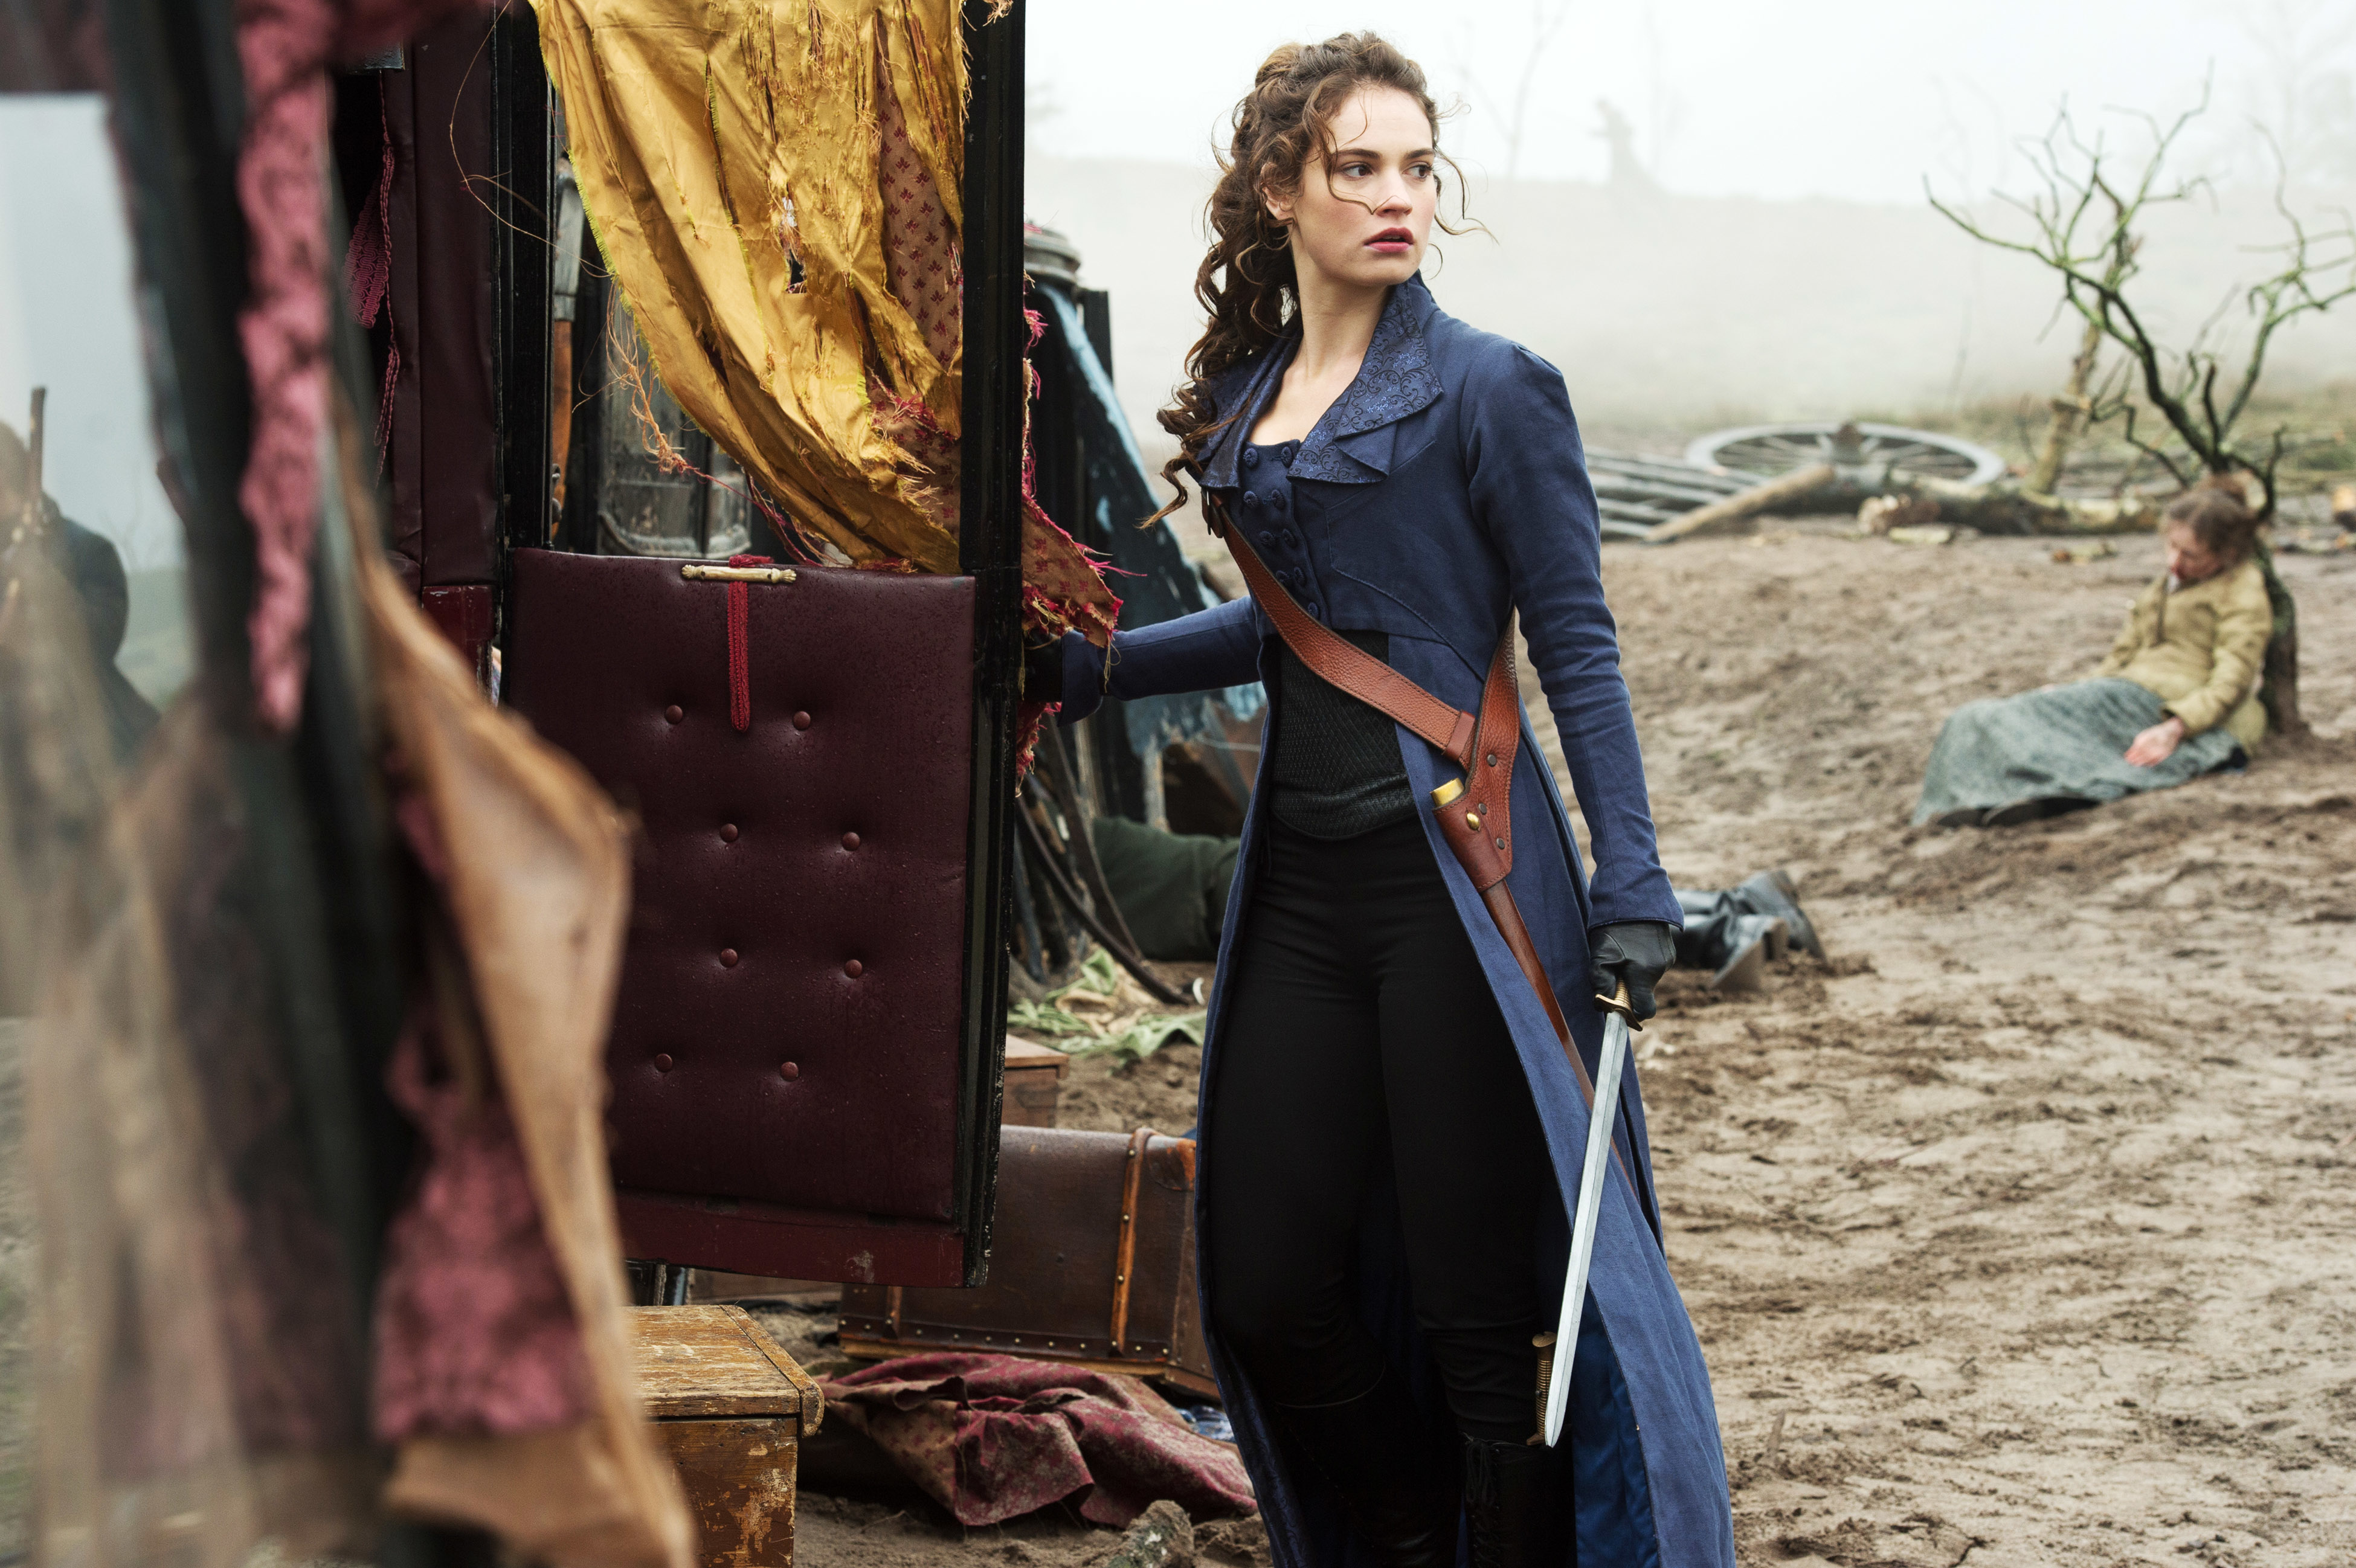 Woman in historical costume with sword by carriage, tense scene from TV show/movie